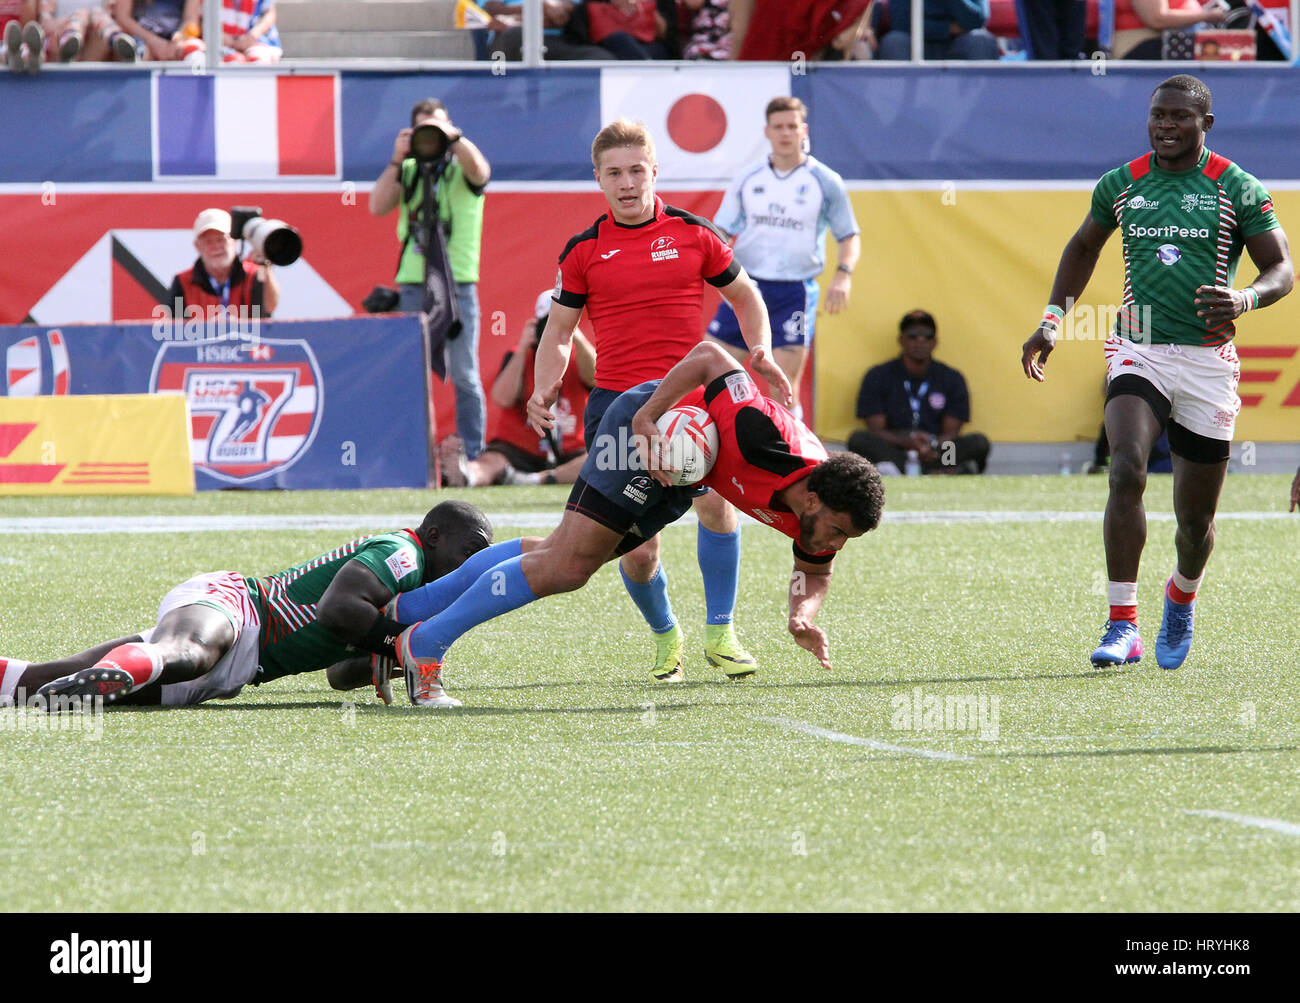 March 5, 2017 - Kenyan Billy Odhiambo is tackled by Russian Dmitry Suhkin during the 2017 USA Sevens International Rugby Tournament game between Kenya and Russia on March 4, 2017 at Sam Boyd Stadium in Las Vegas, Nevada Credit: Marcel Thomas/ZUMA Wire/Alamy Live News Stock Photo